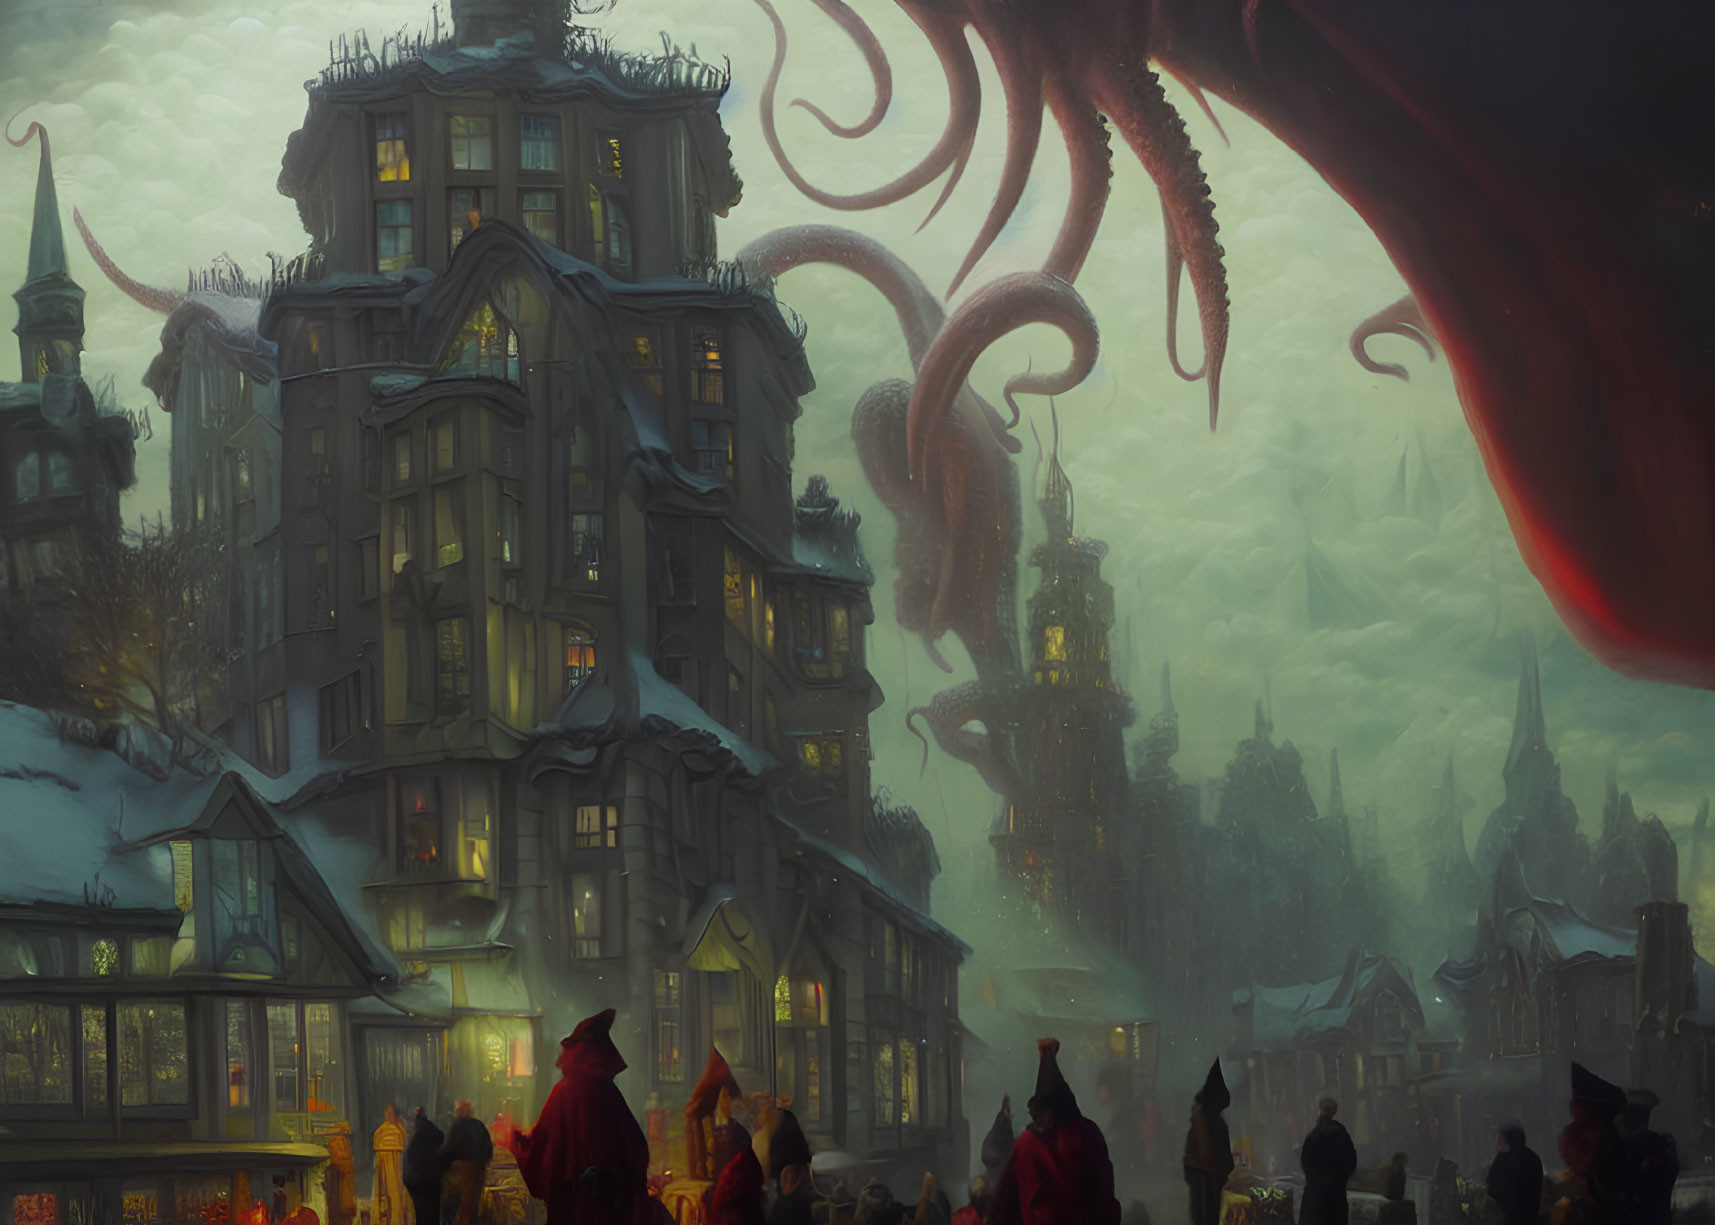 Gloomy cityscape with cloaked figures, eerie building, and massive tentacles